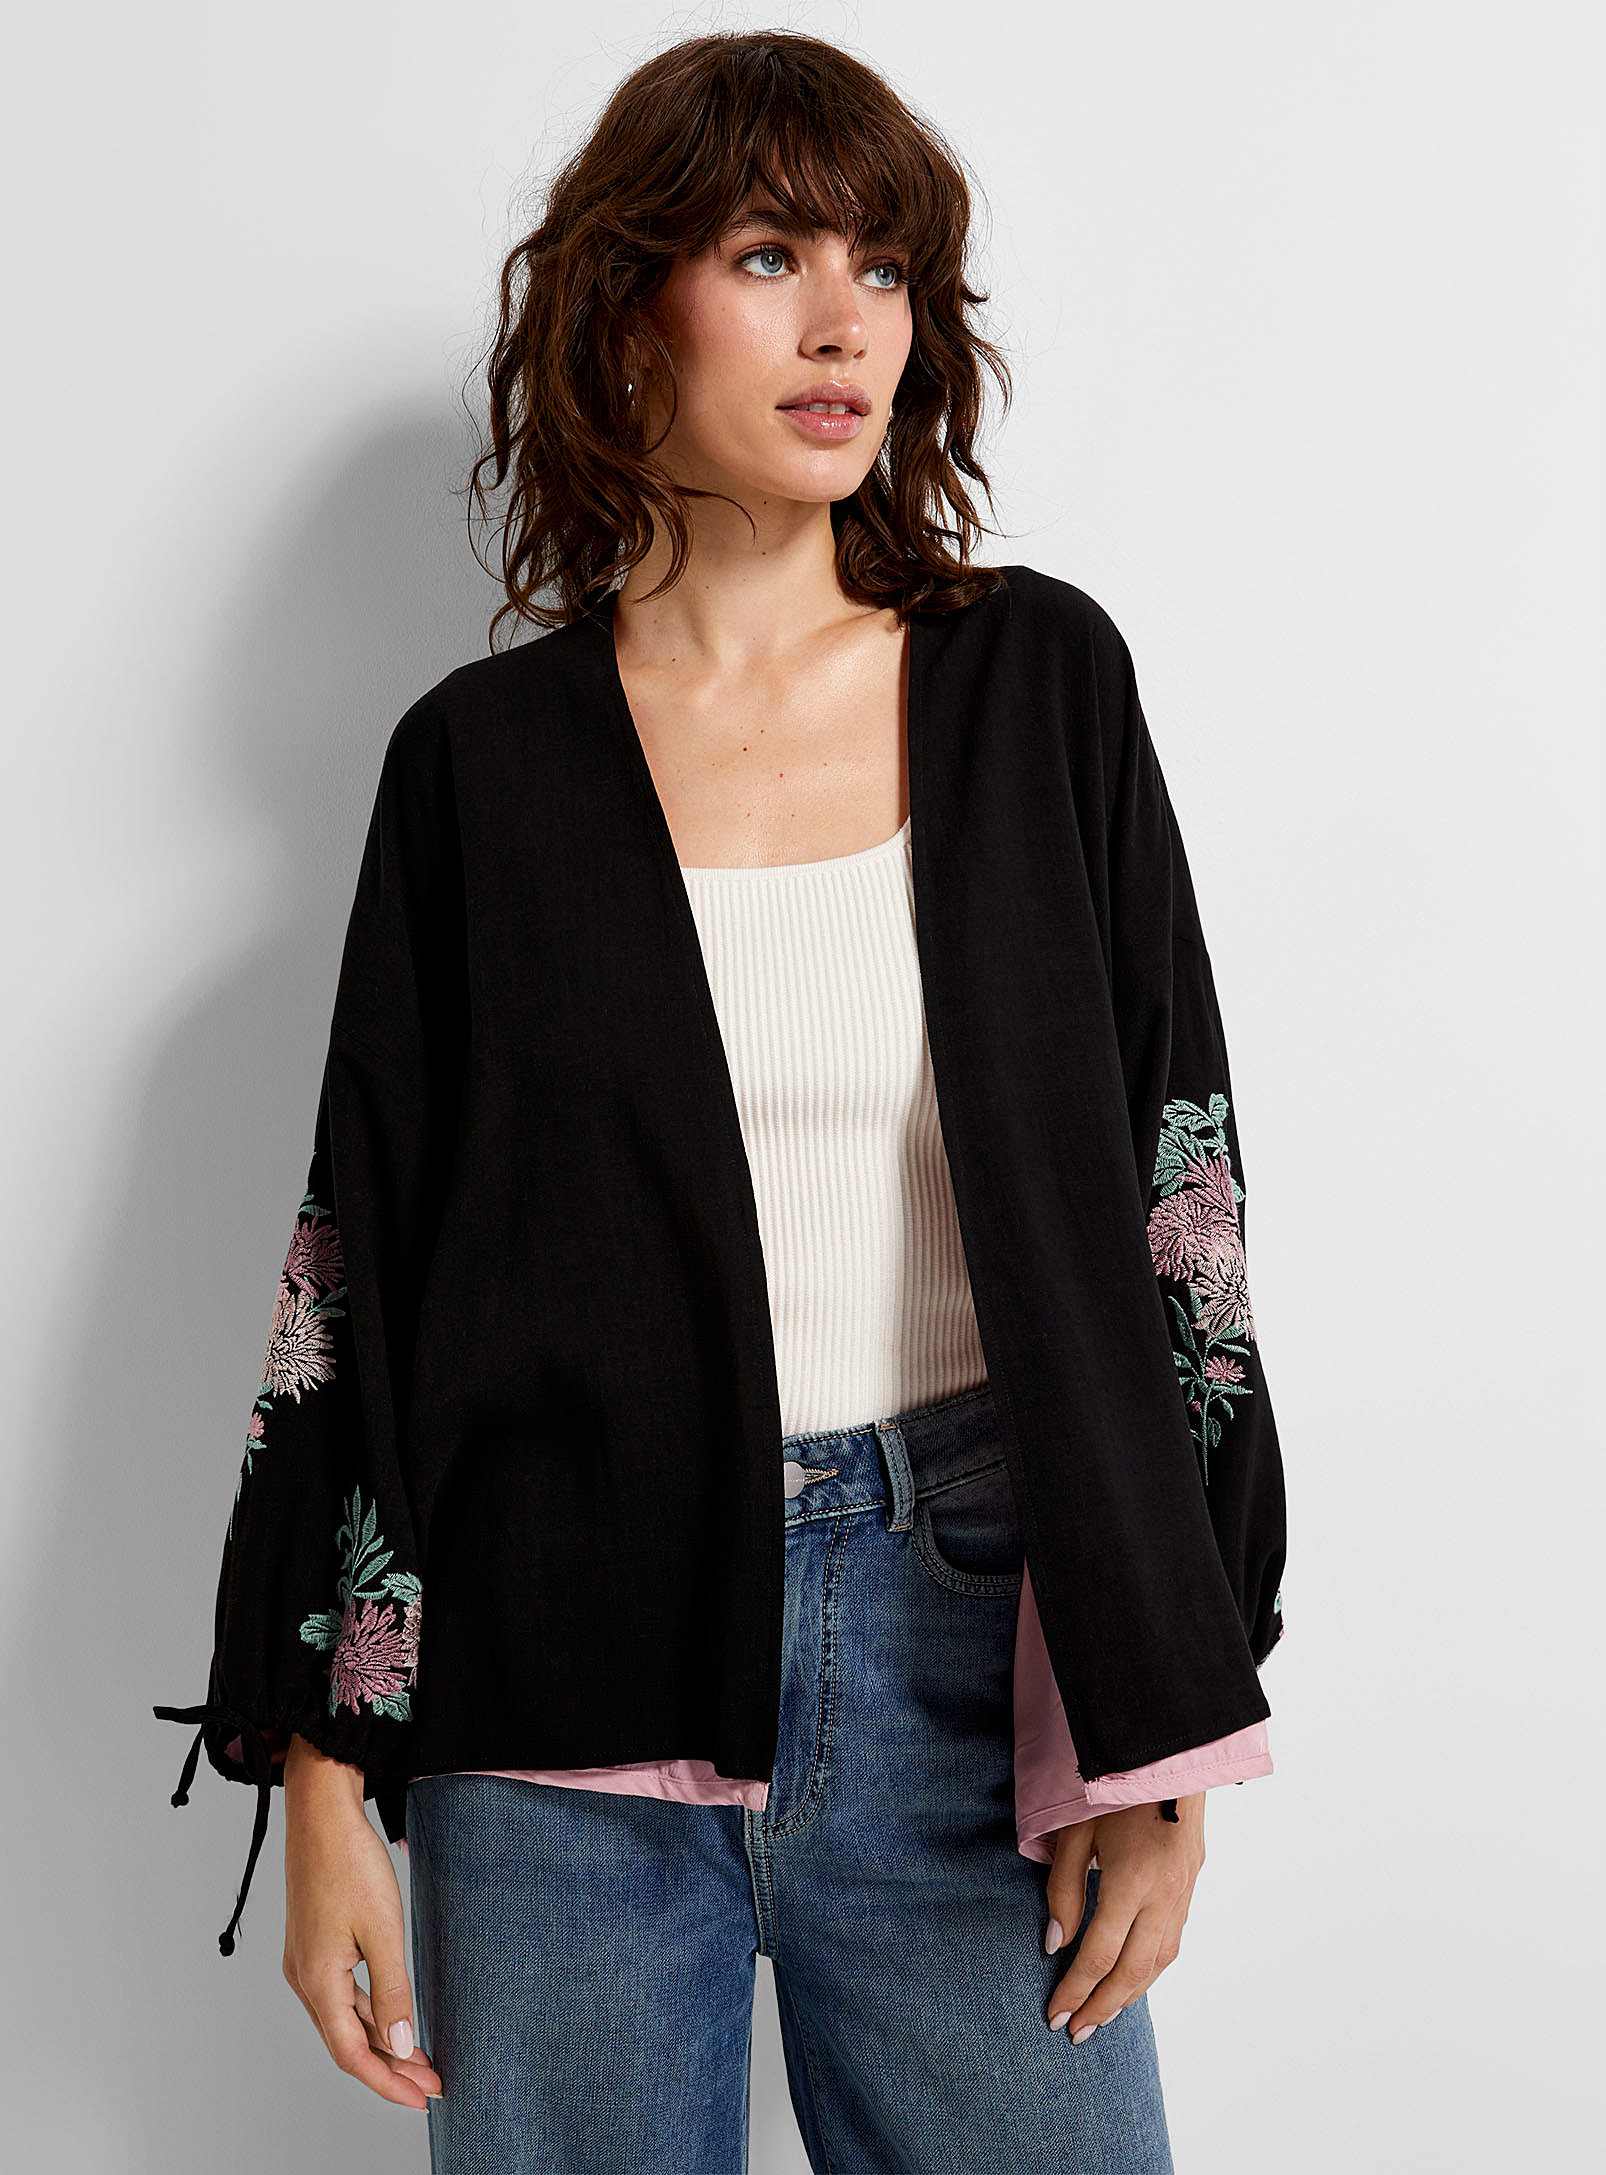 Contemporaine Embroidered Flowers Open Cardigan In Patterned Black